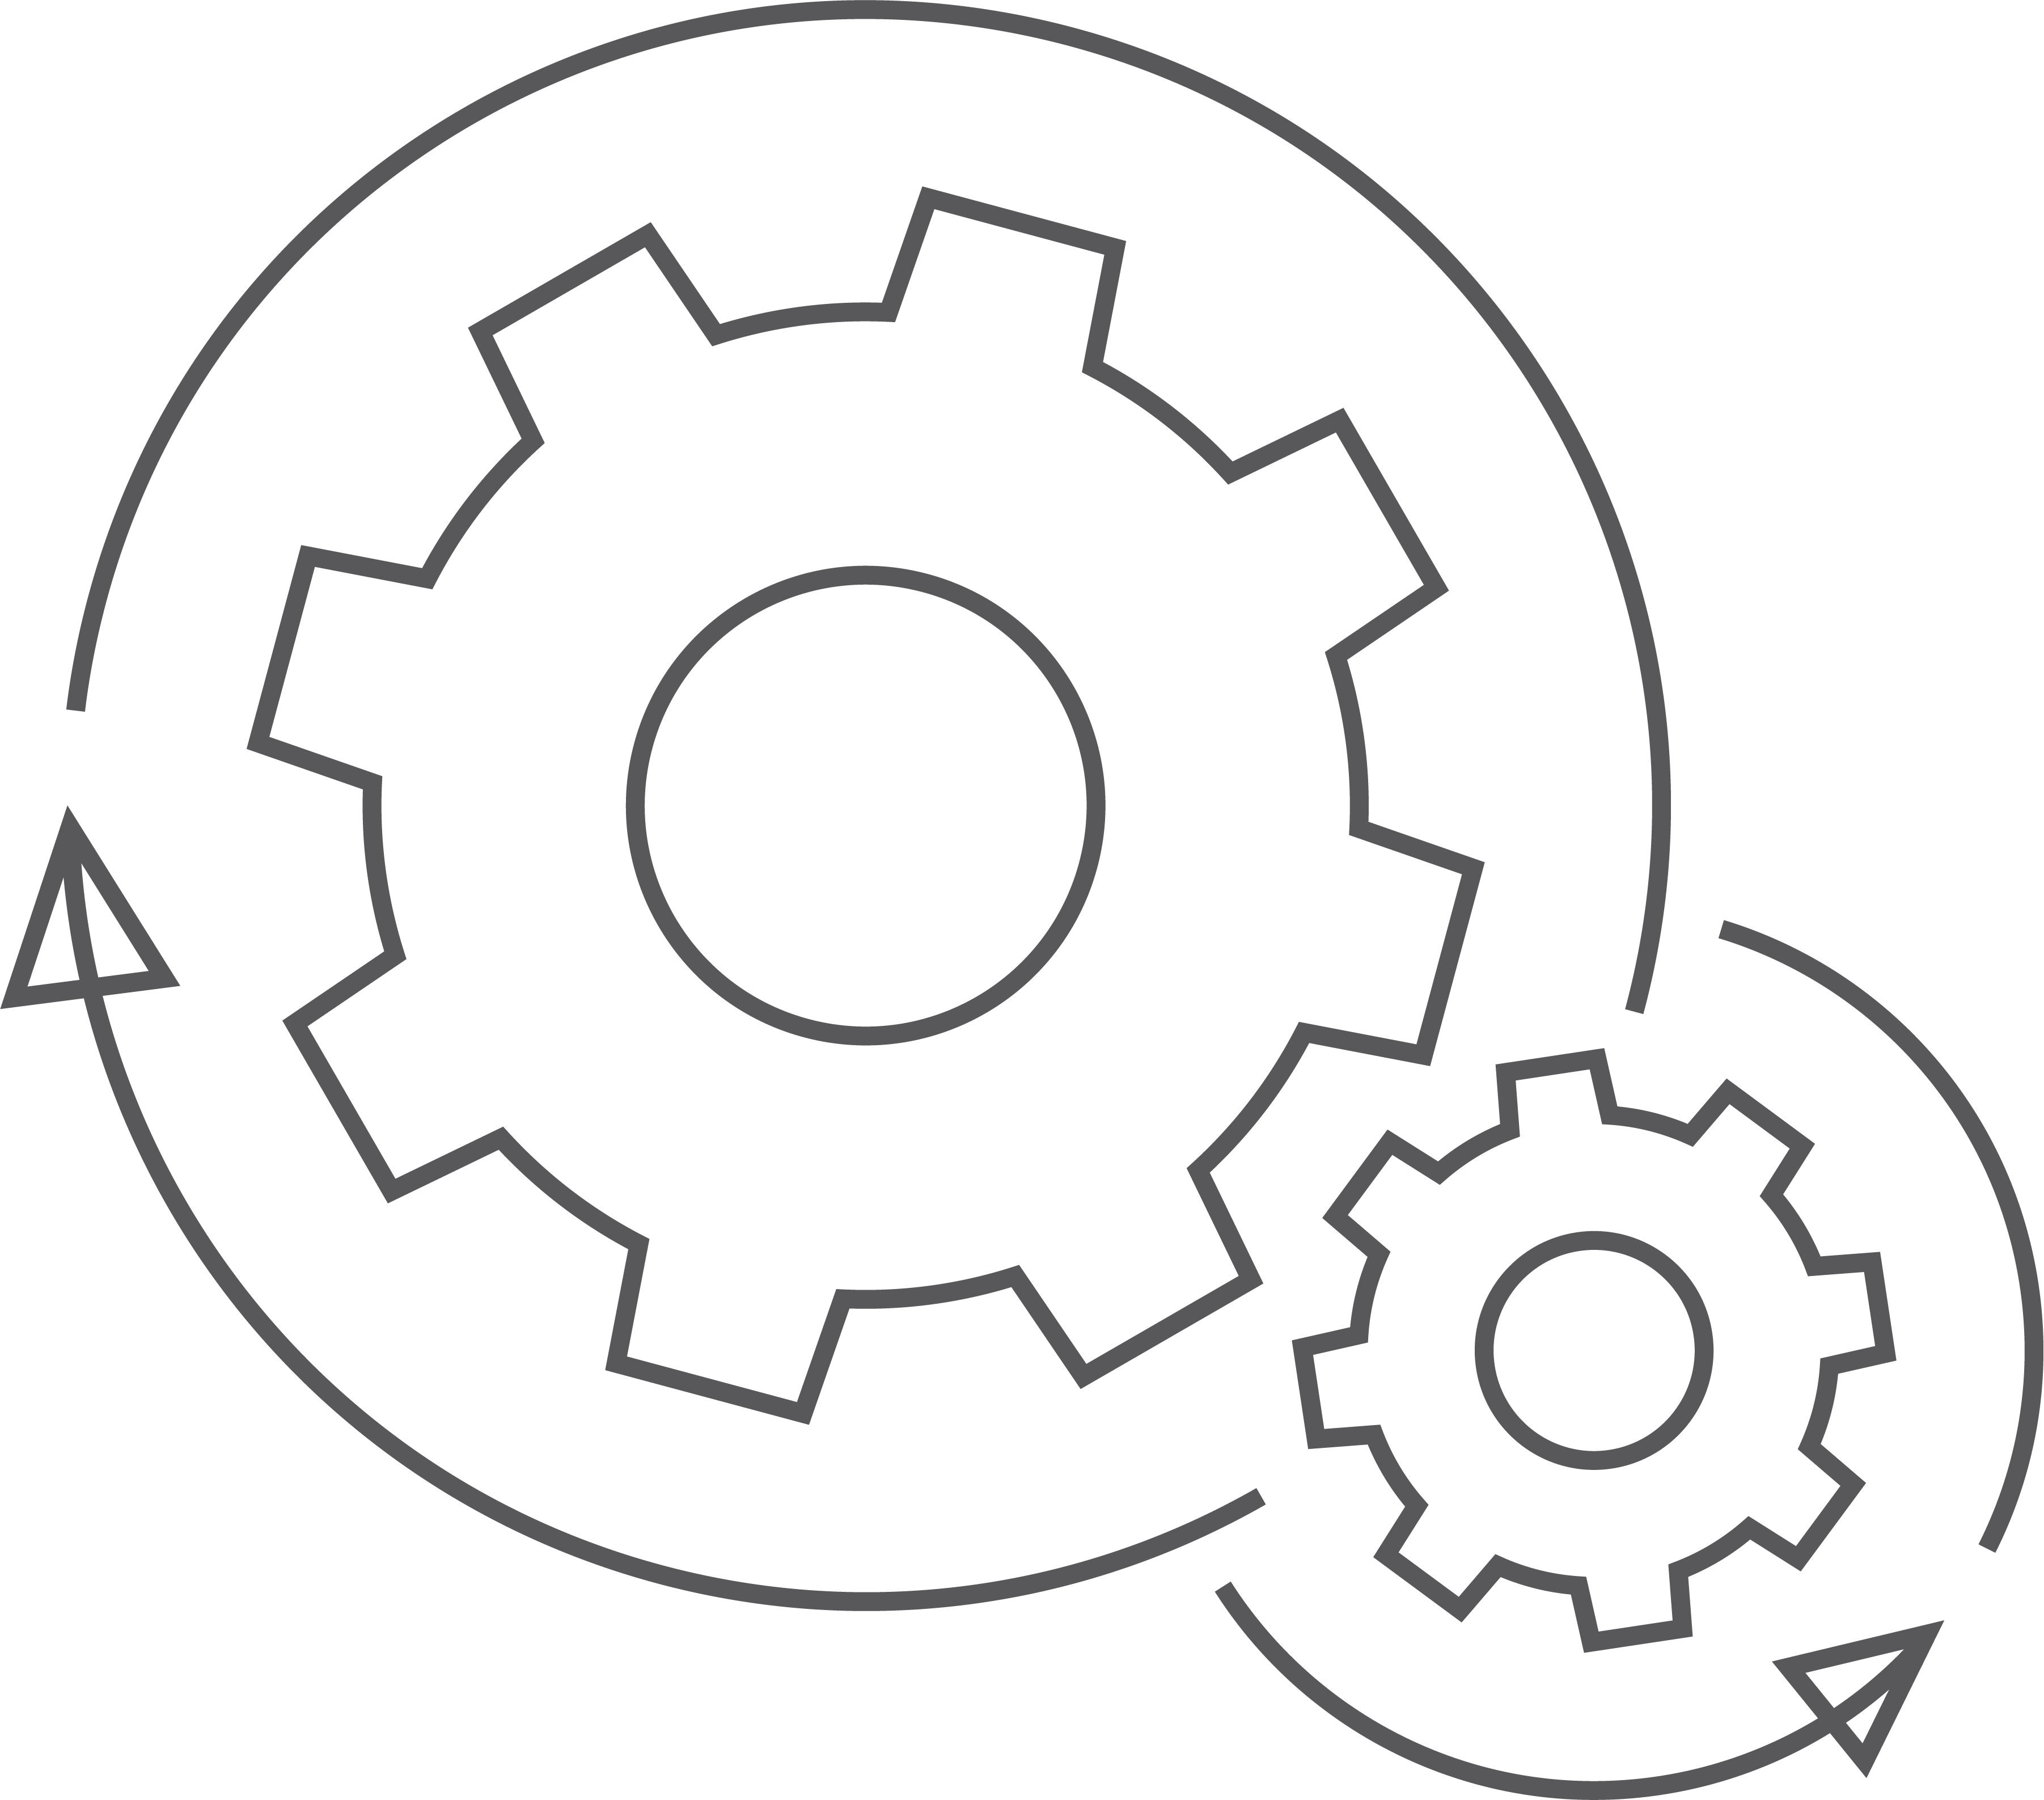 gears.png detail image